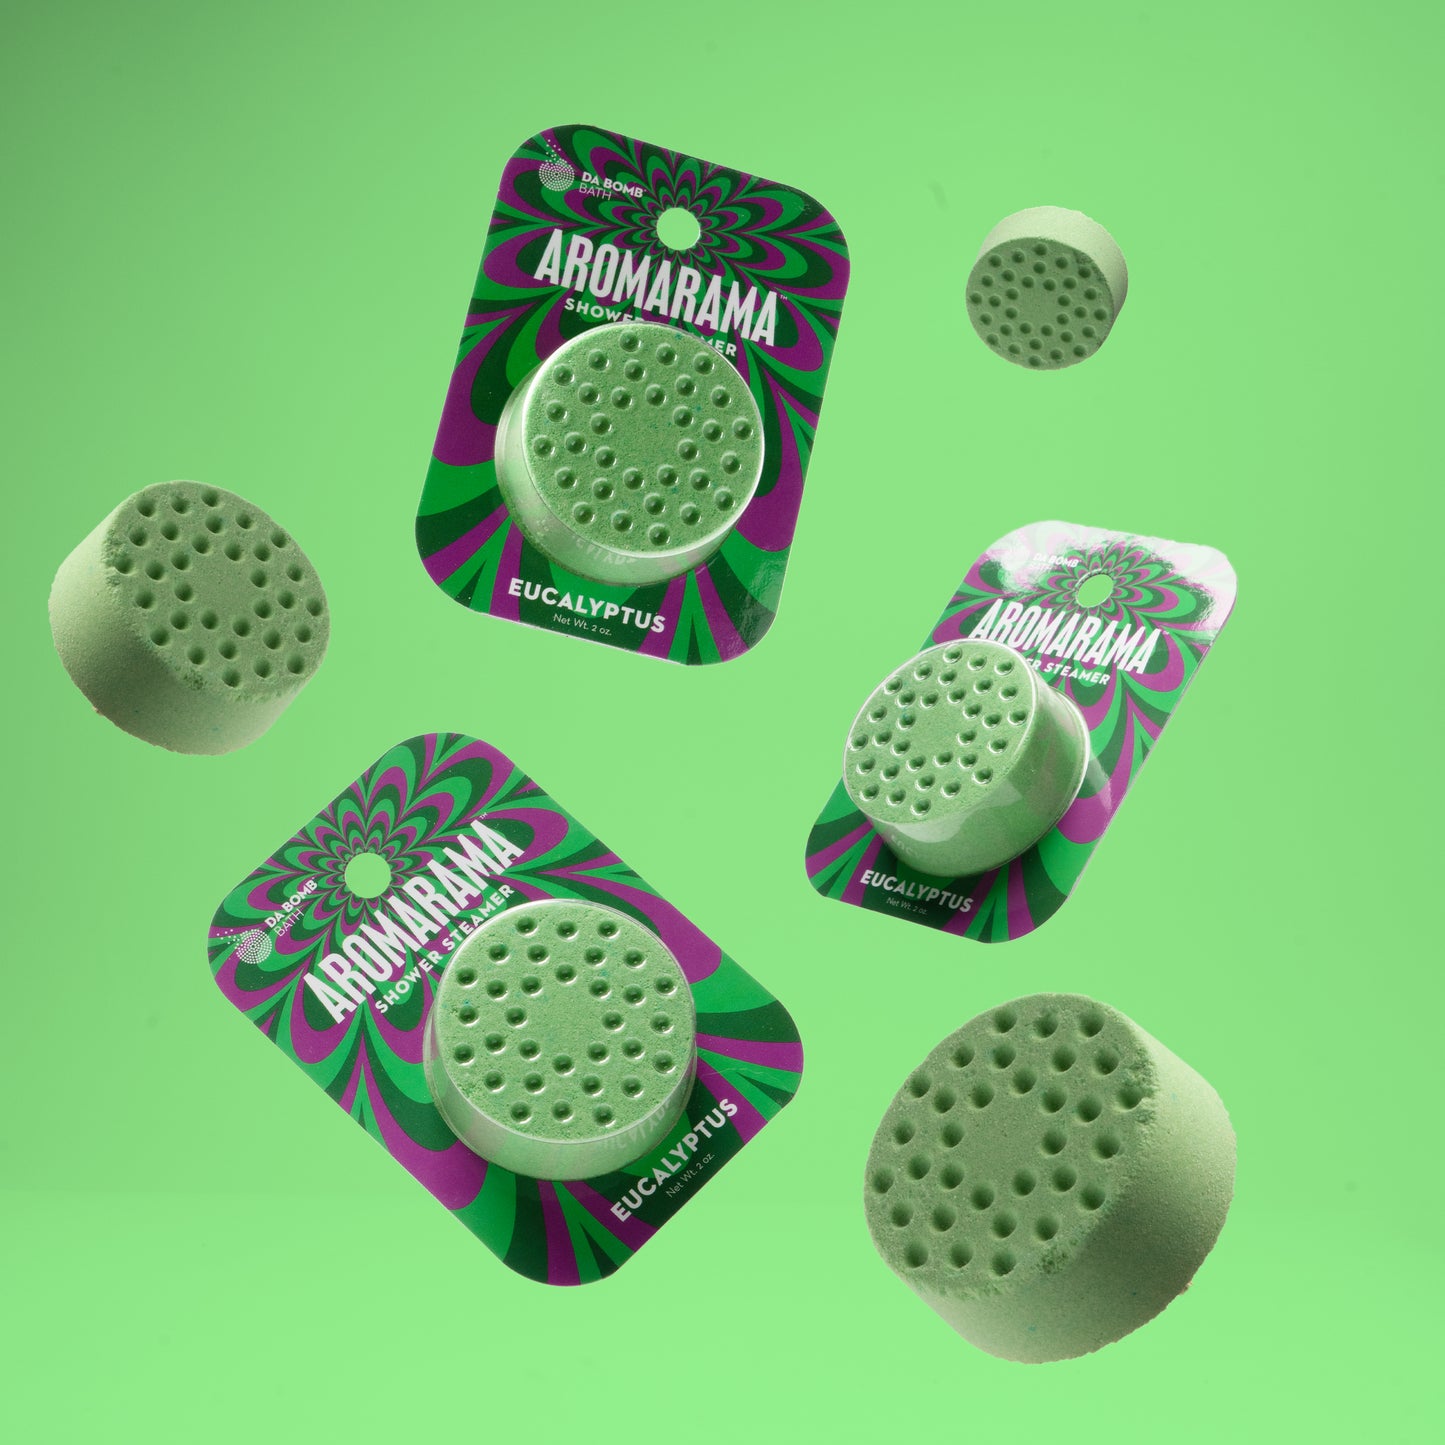 3 packaged showers steamers floating in air with green background